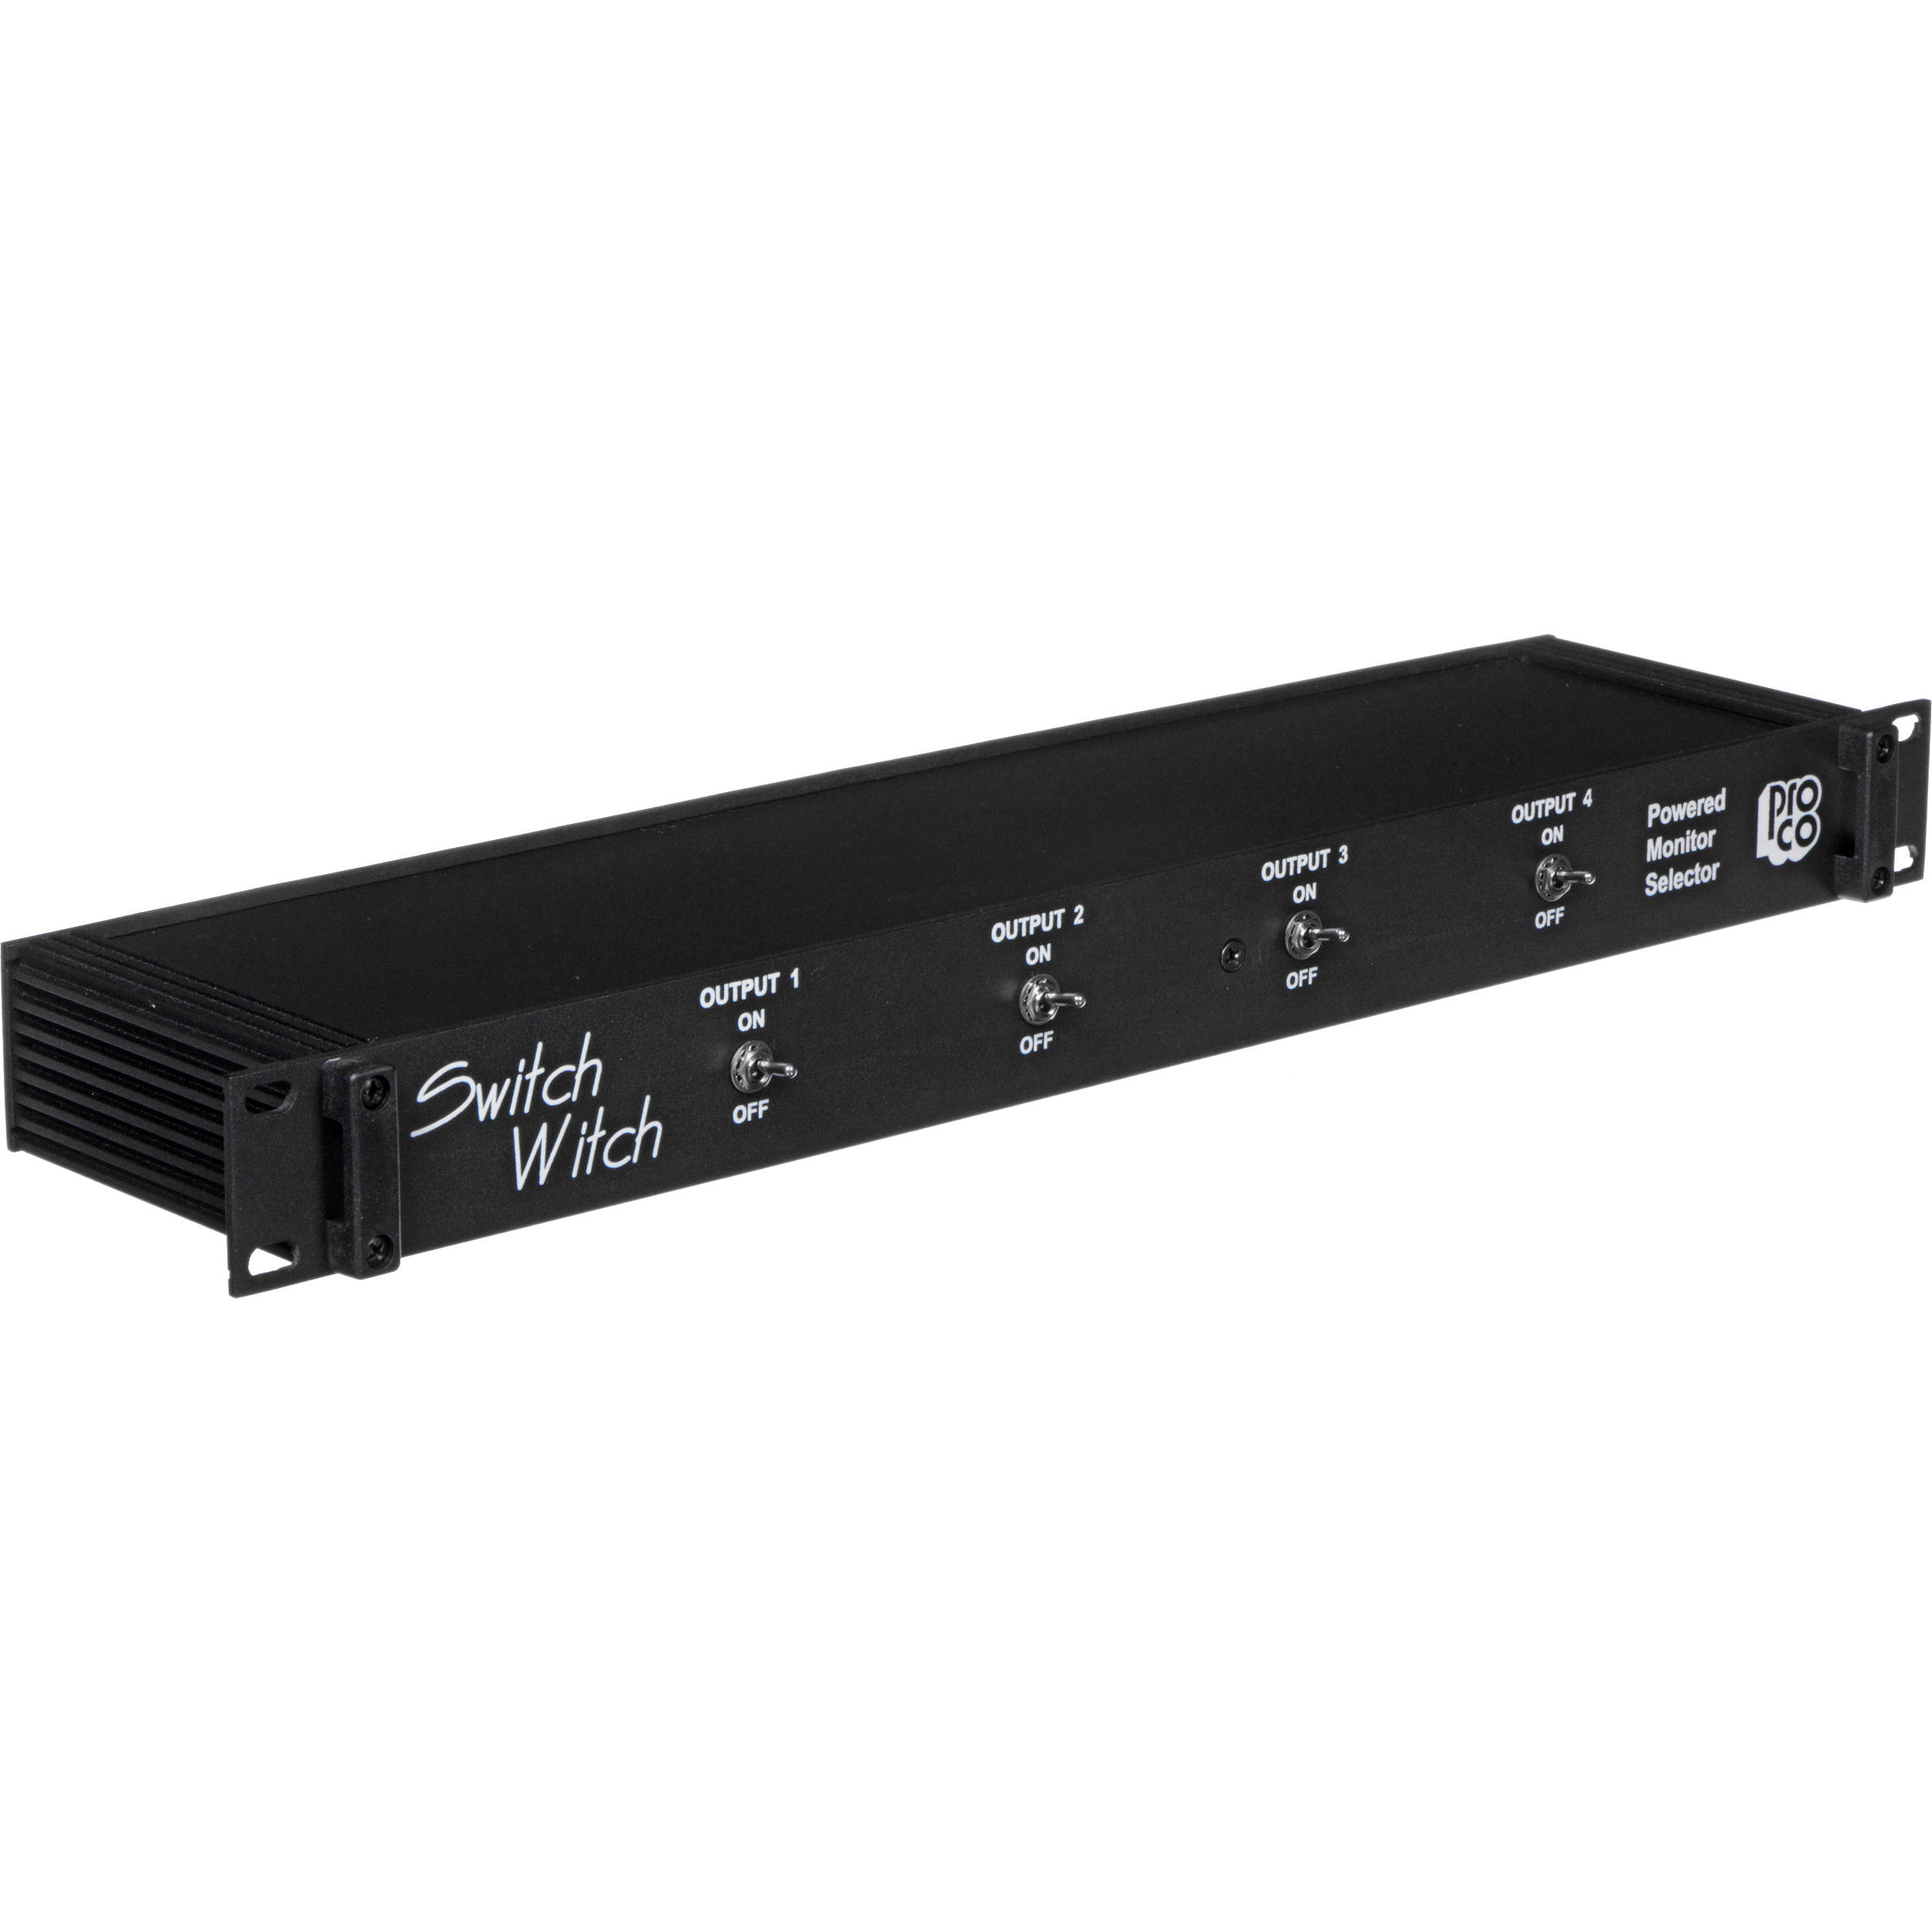 monitor selector switch